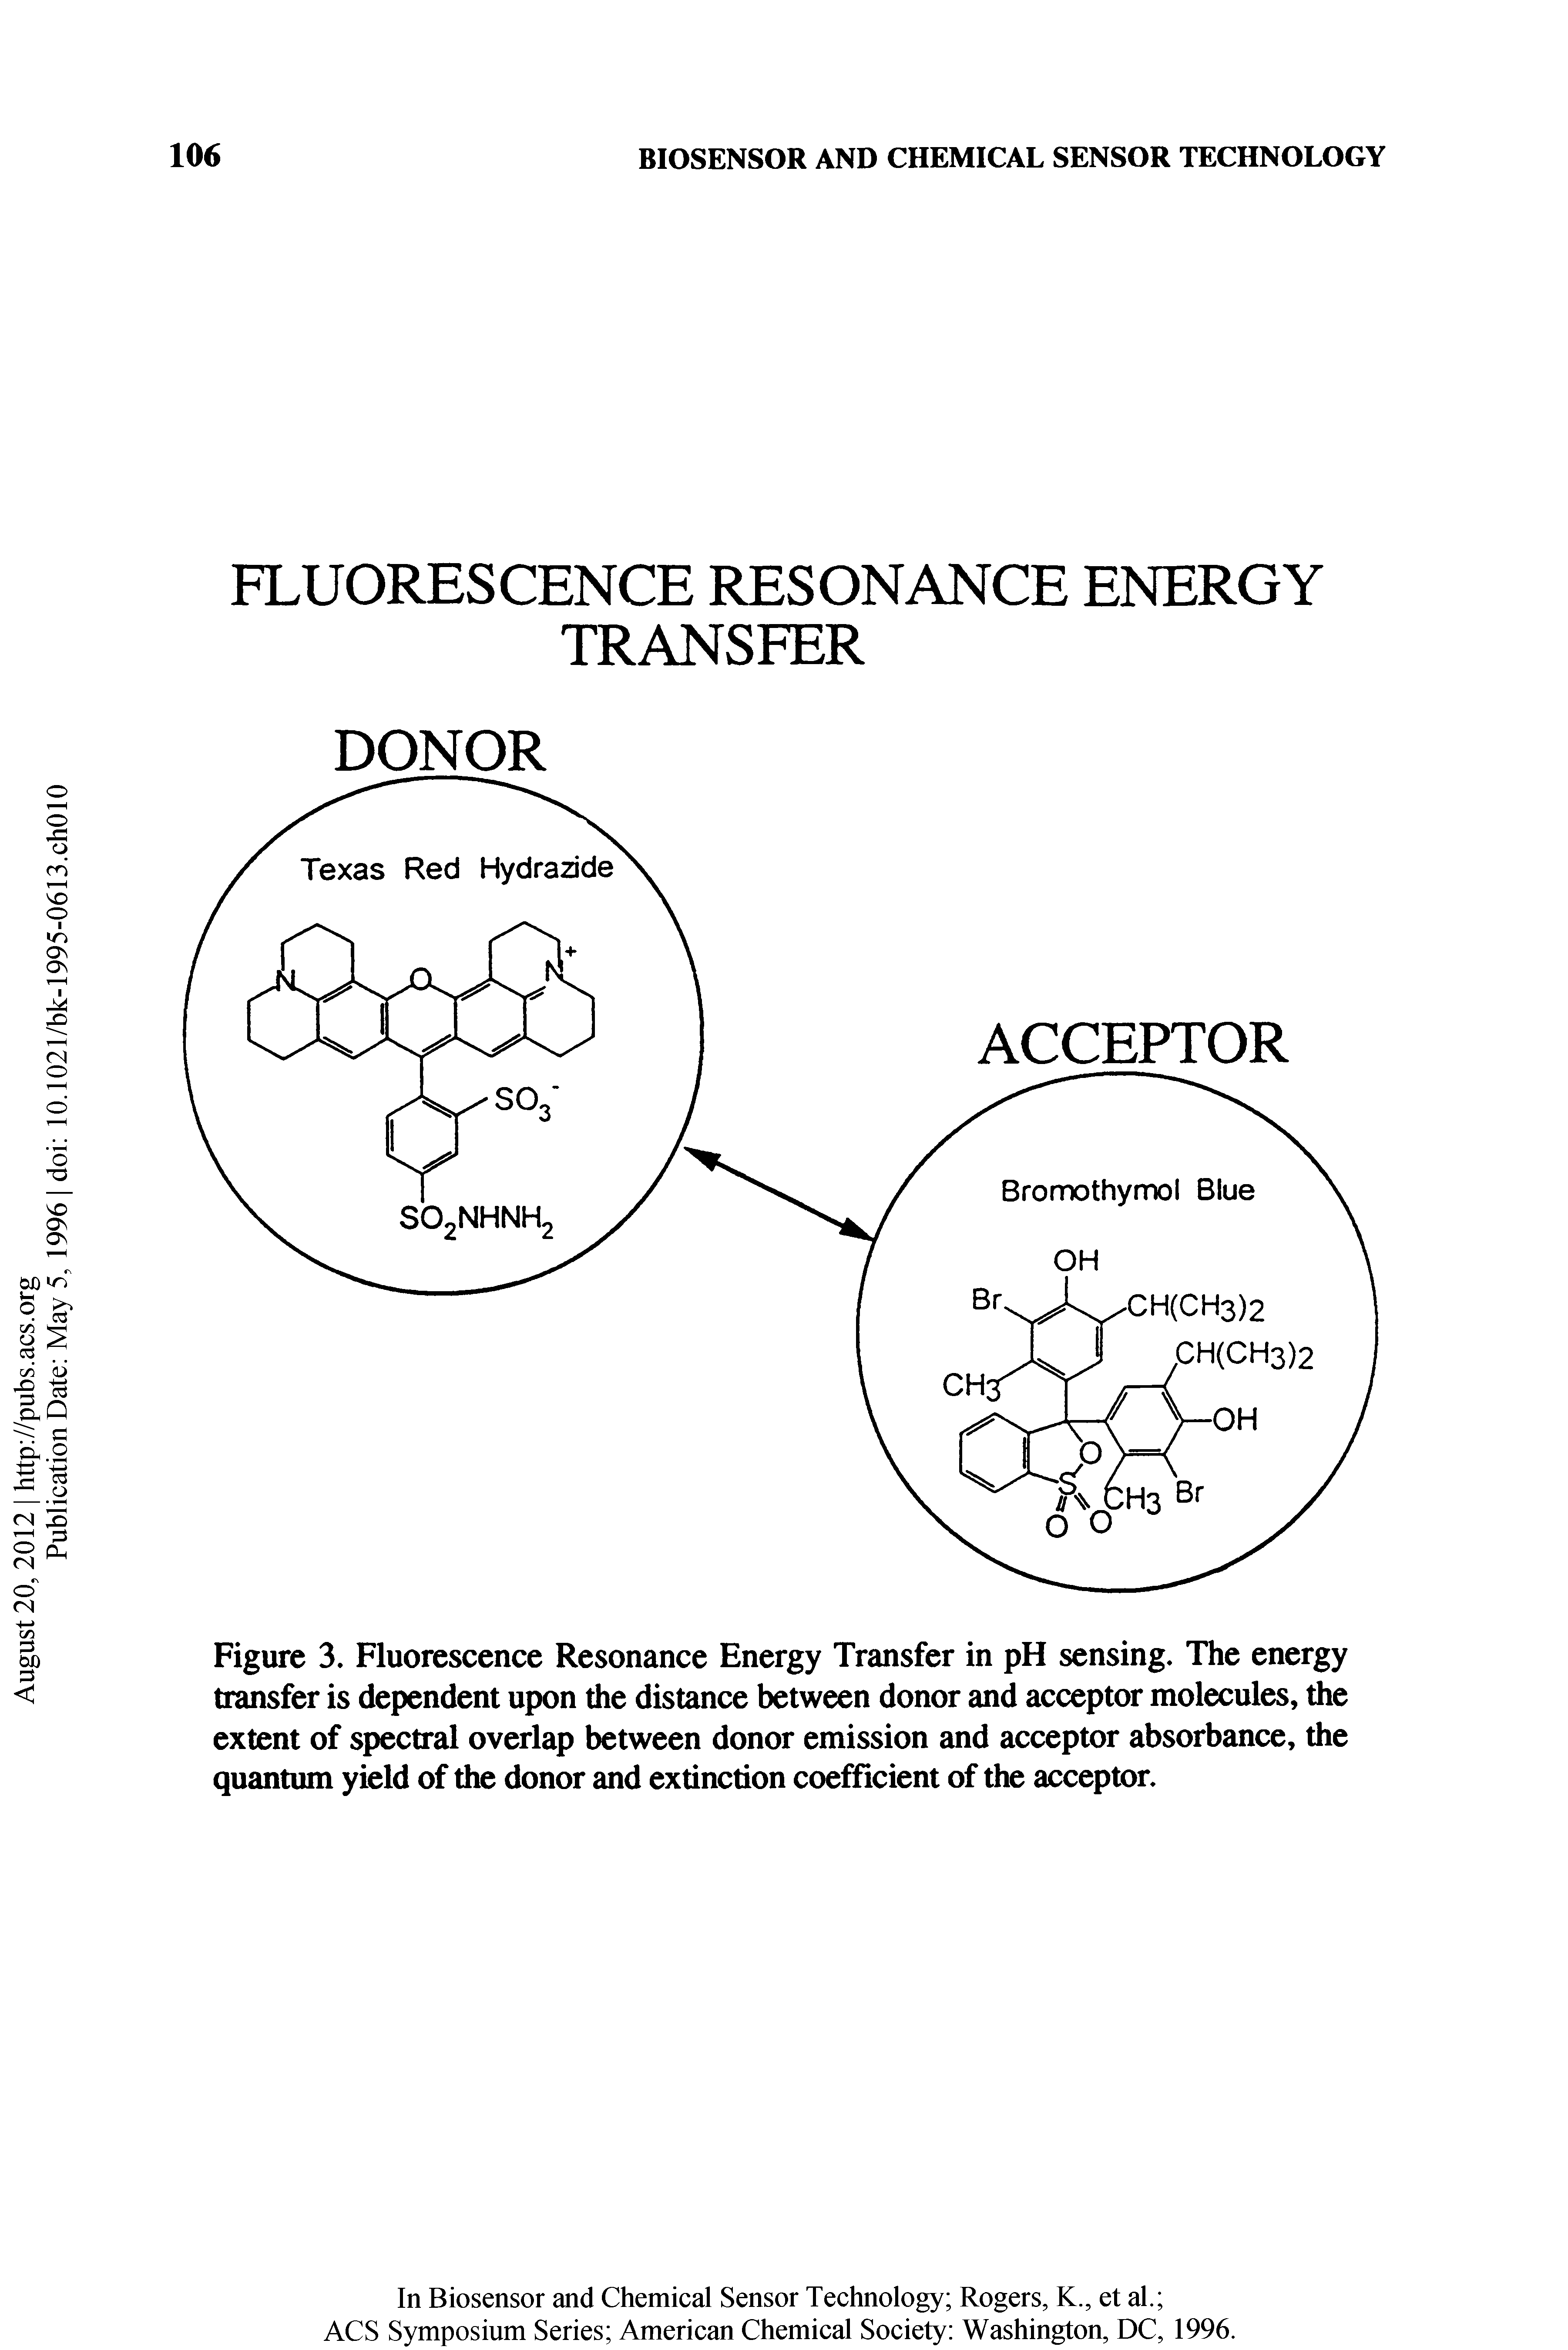 Figure 3. Fluorescence Resonance Energy Transfer in pH sensing. The energy transfer is dependent upon the distance between donor and acceptor molecules, the extent of spectral overlap between donor emission and acceptor absorbance, the quantum yield of the donor and extinction coefficient of the acceptor.